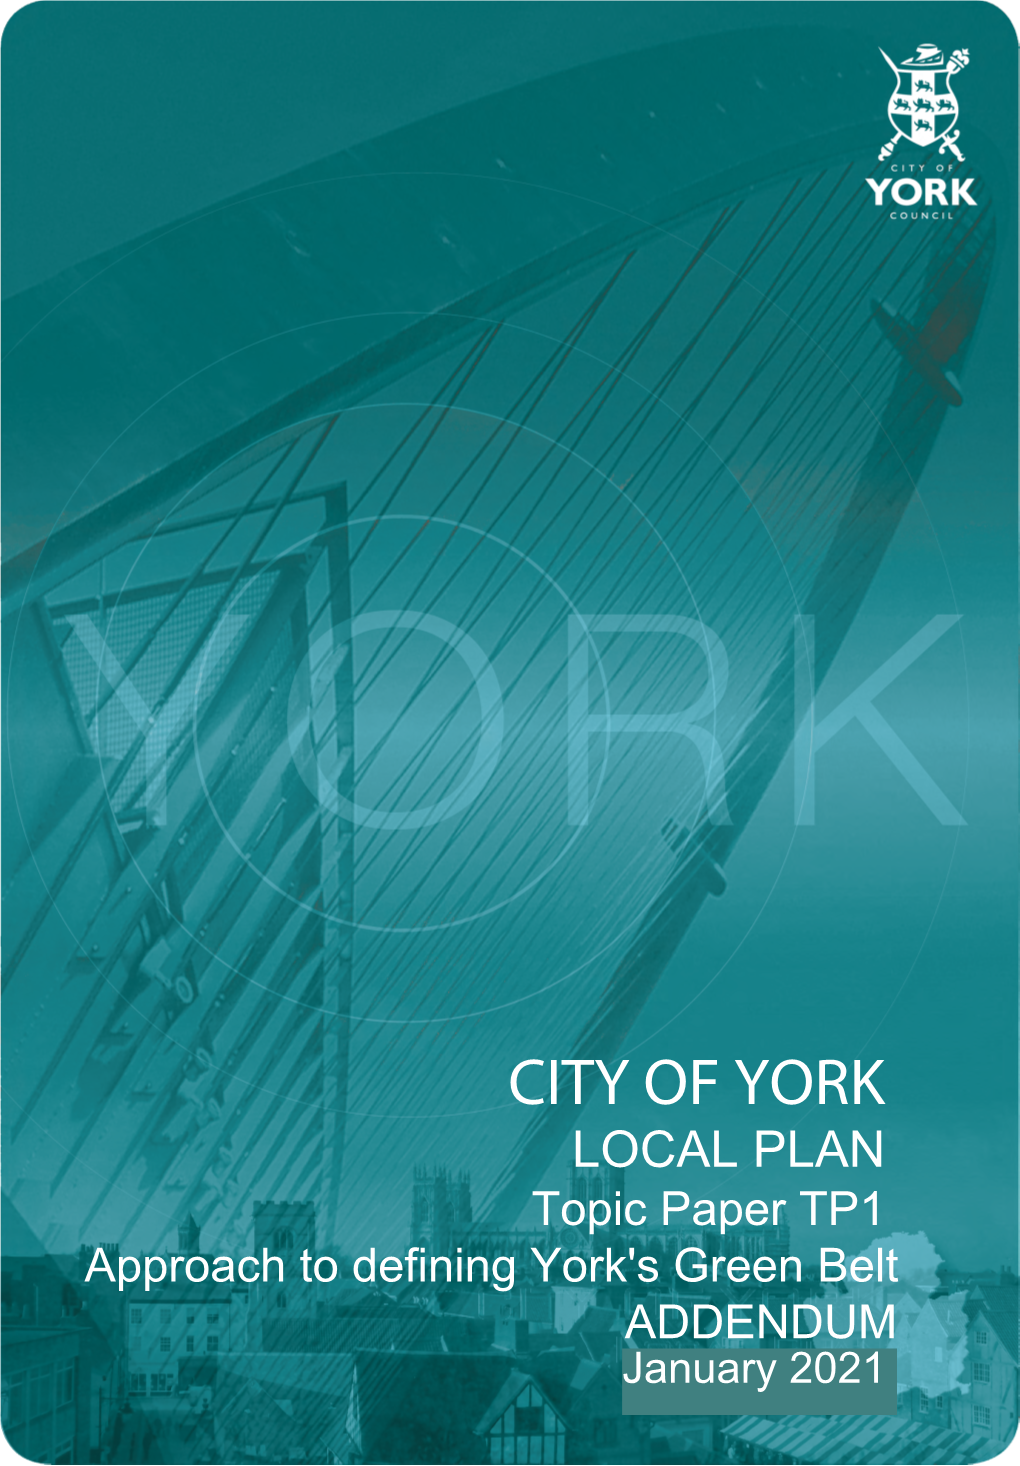 LOCAL PLAN Topic Paper TP1 Approach to Defining York's Green Belt ADDENDUM March 2019